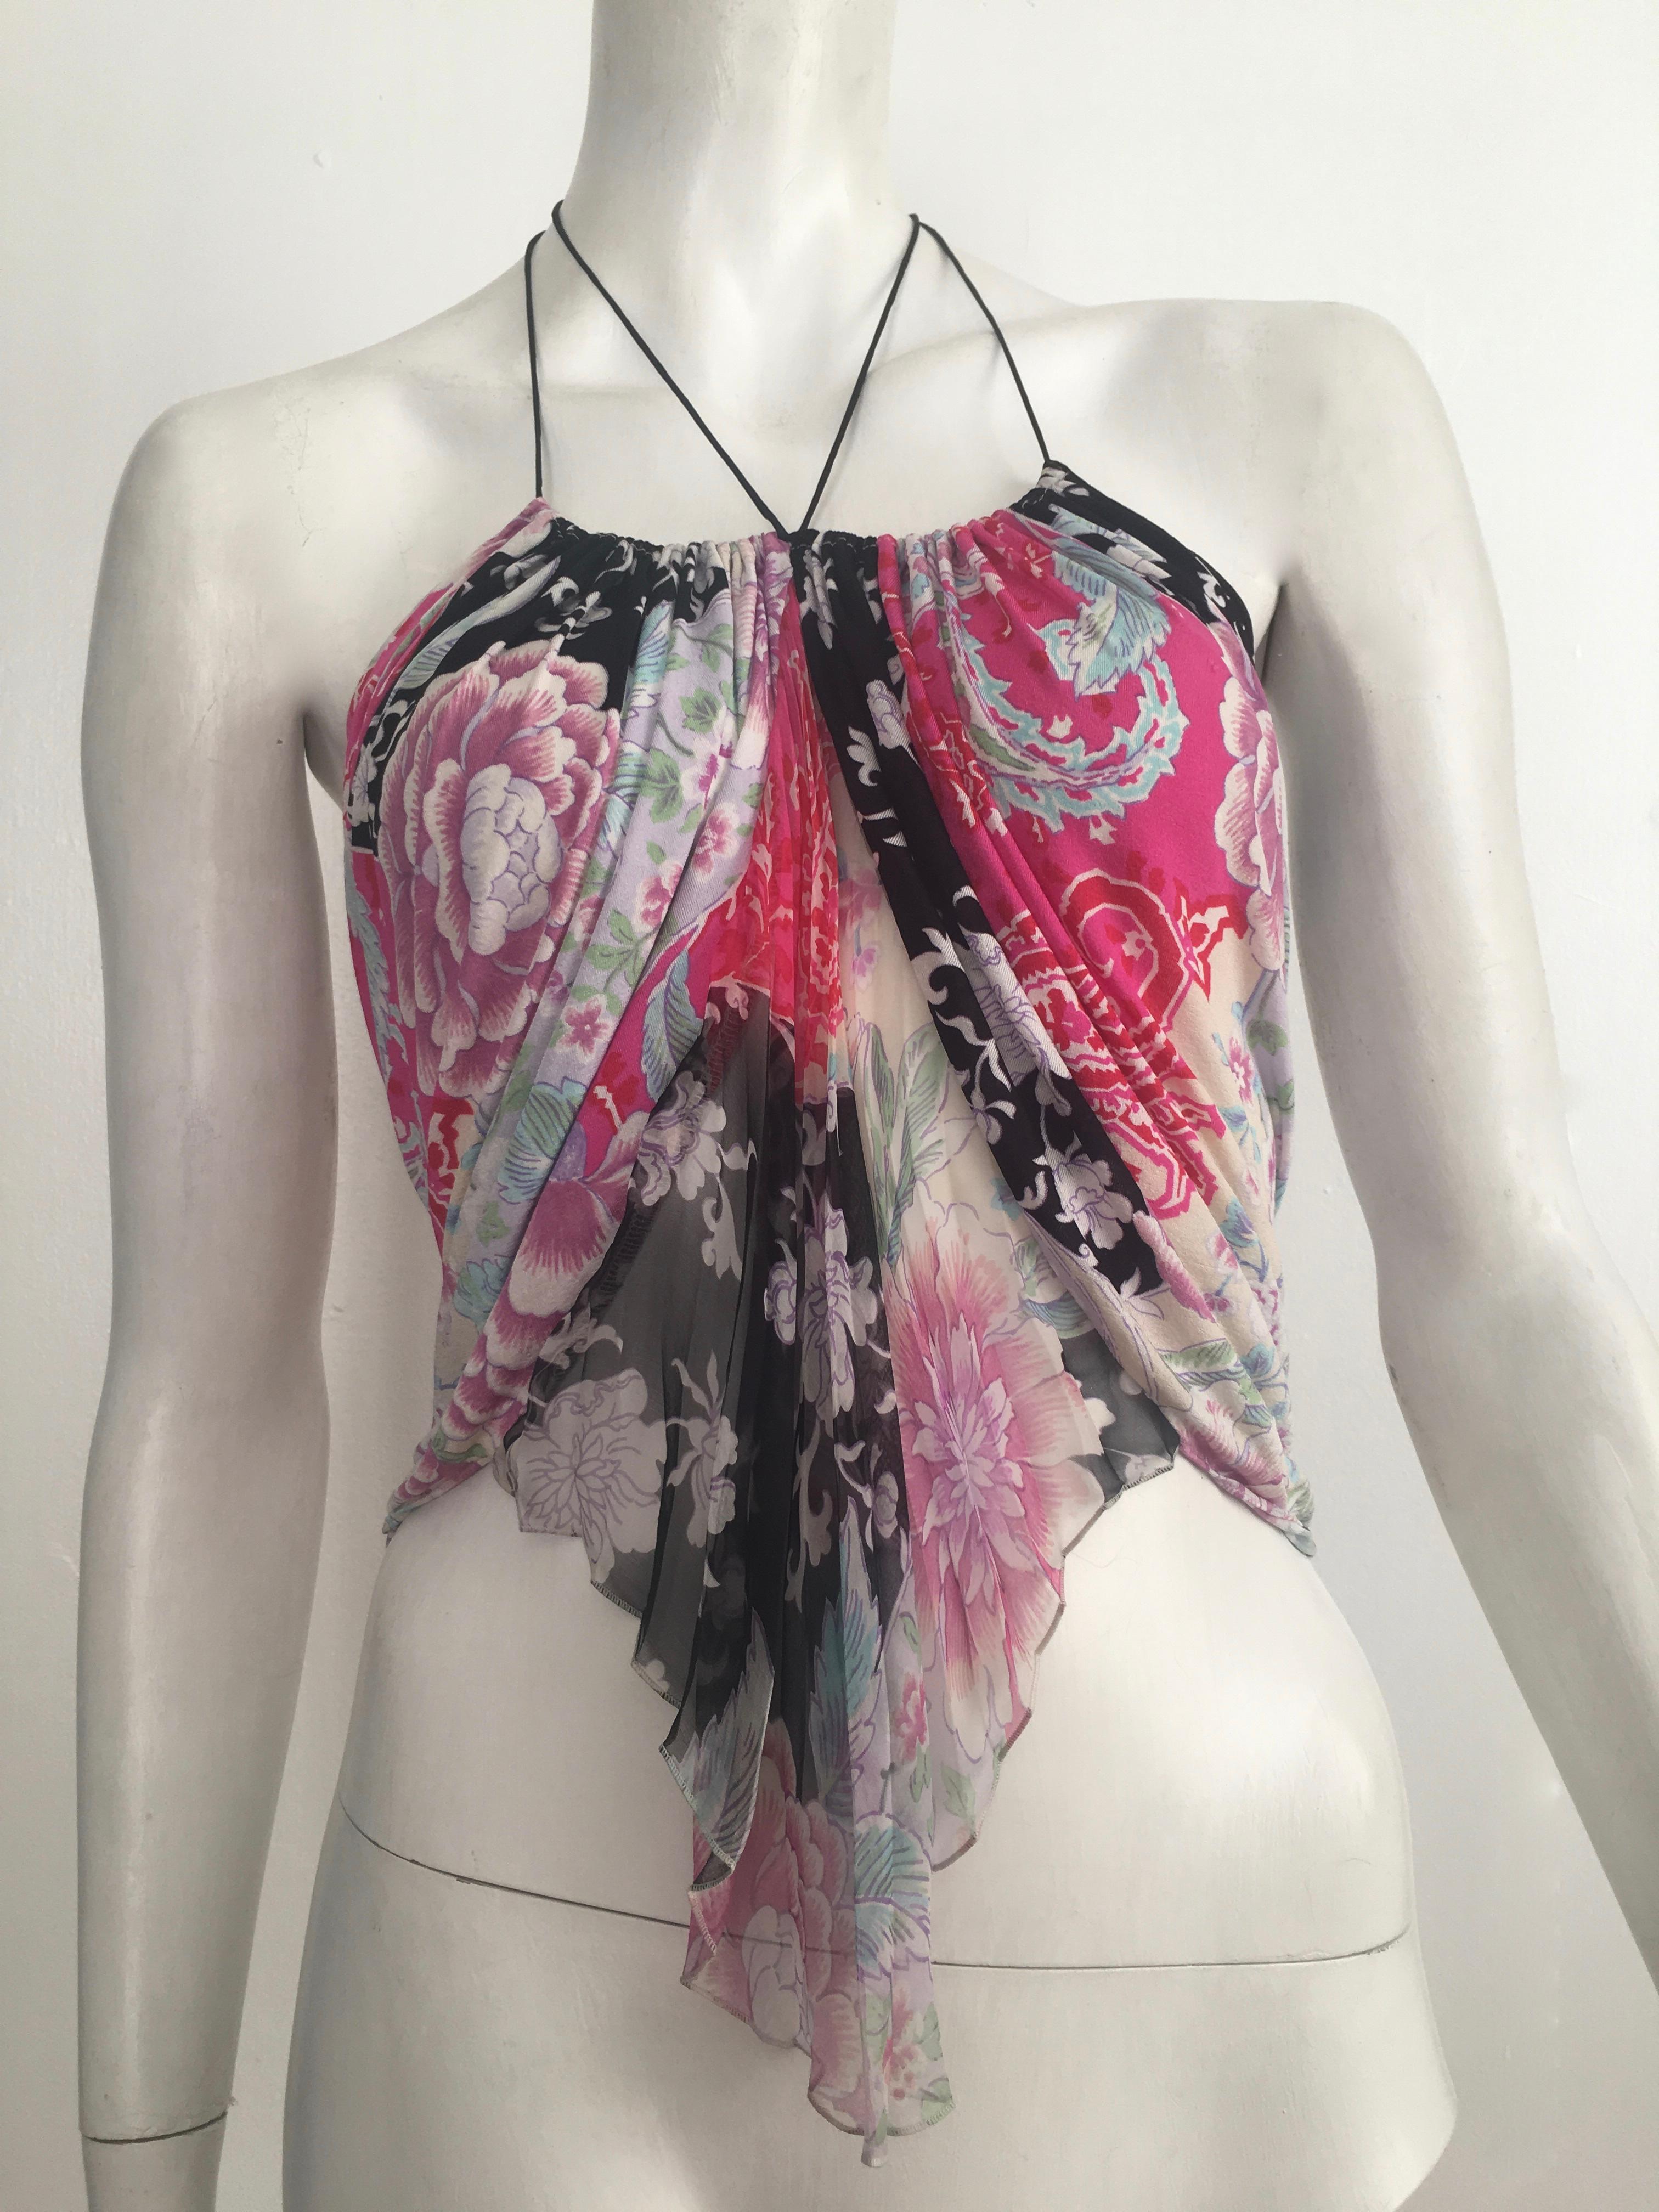 Emanuel Ungaro 1990s silk floral sexy camisole is a size 4.  This fits Matilda the Mannequin, who wears a size 4, beautifully. This is a gorgeous top that can be worn with your Thierry Mugler skirt or your Lanvin pants.  Wear it with or without a